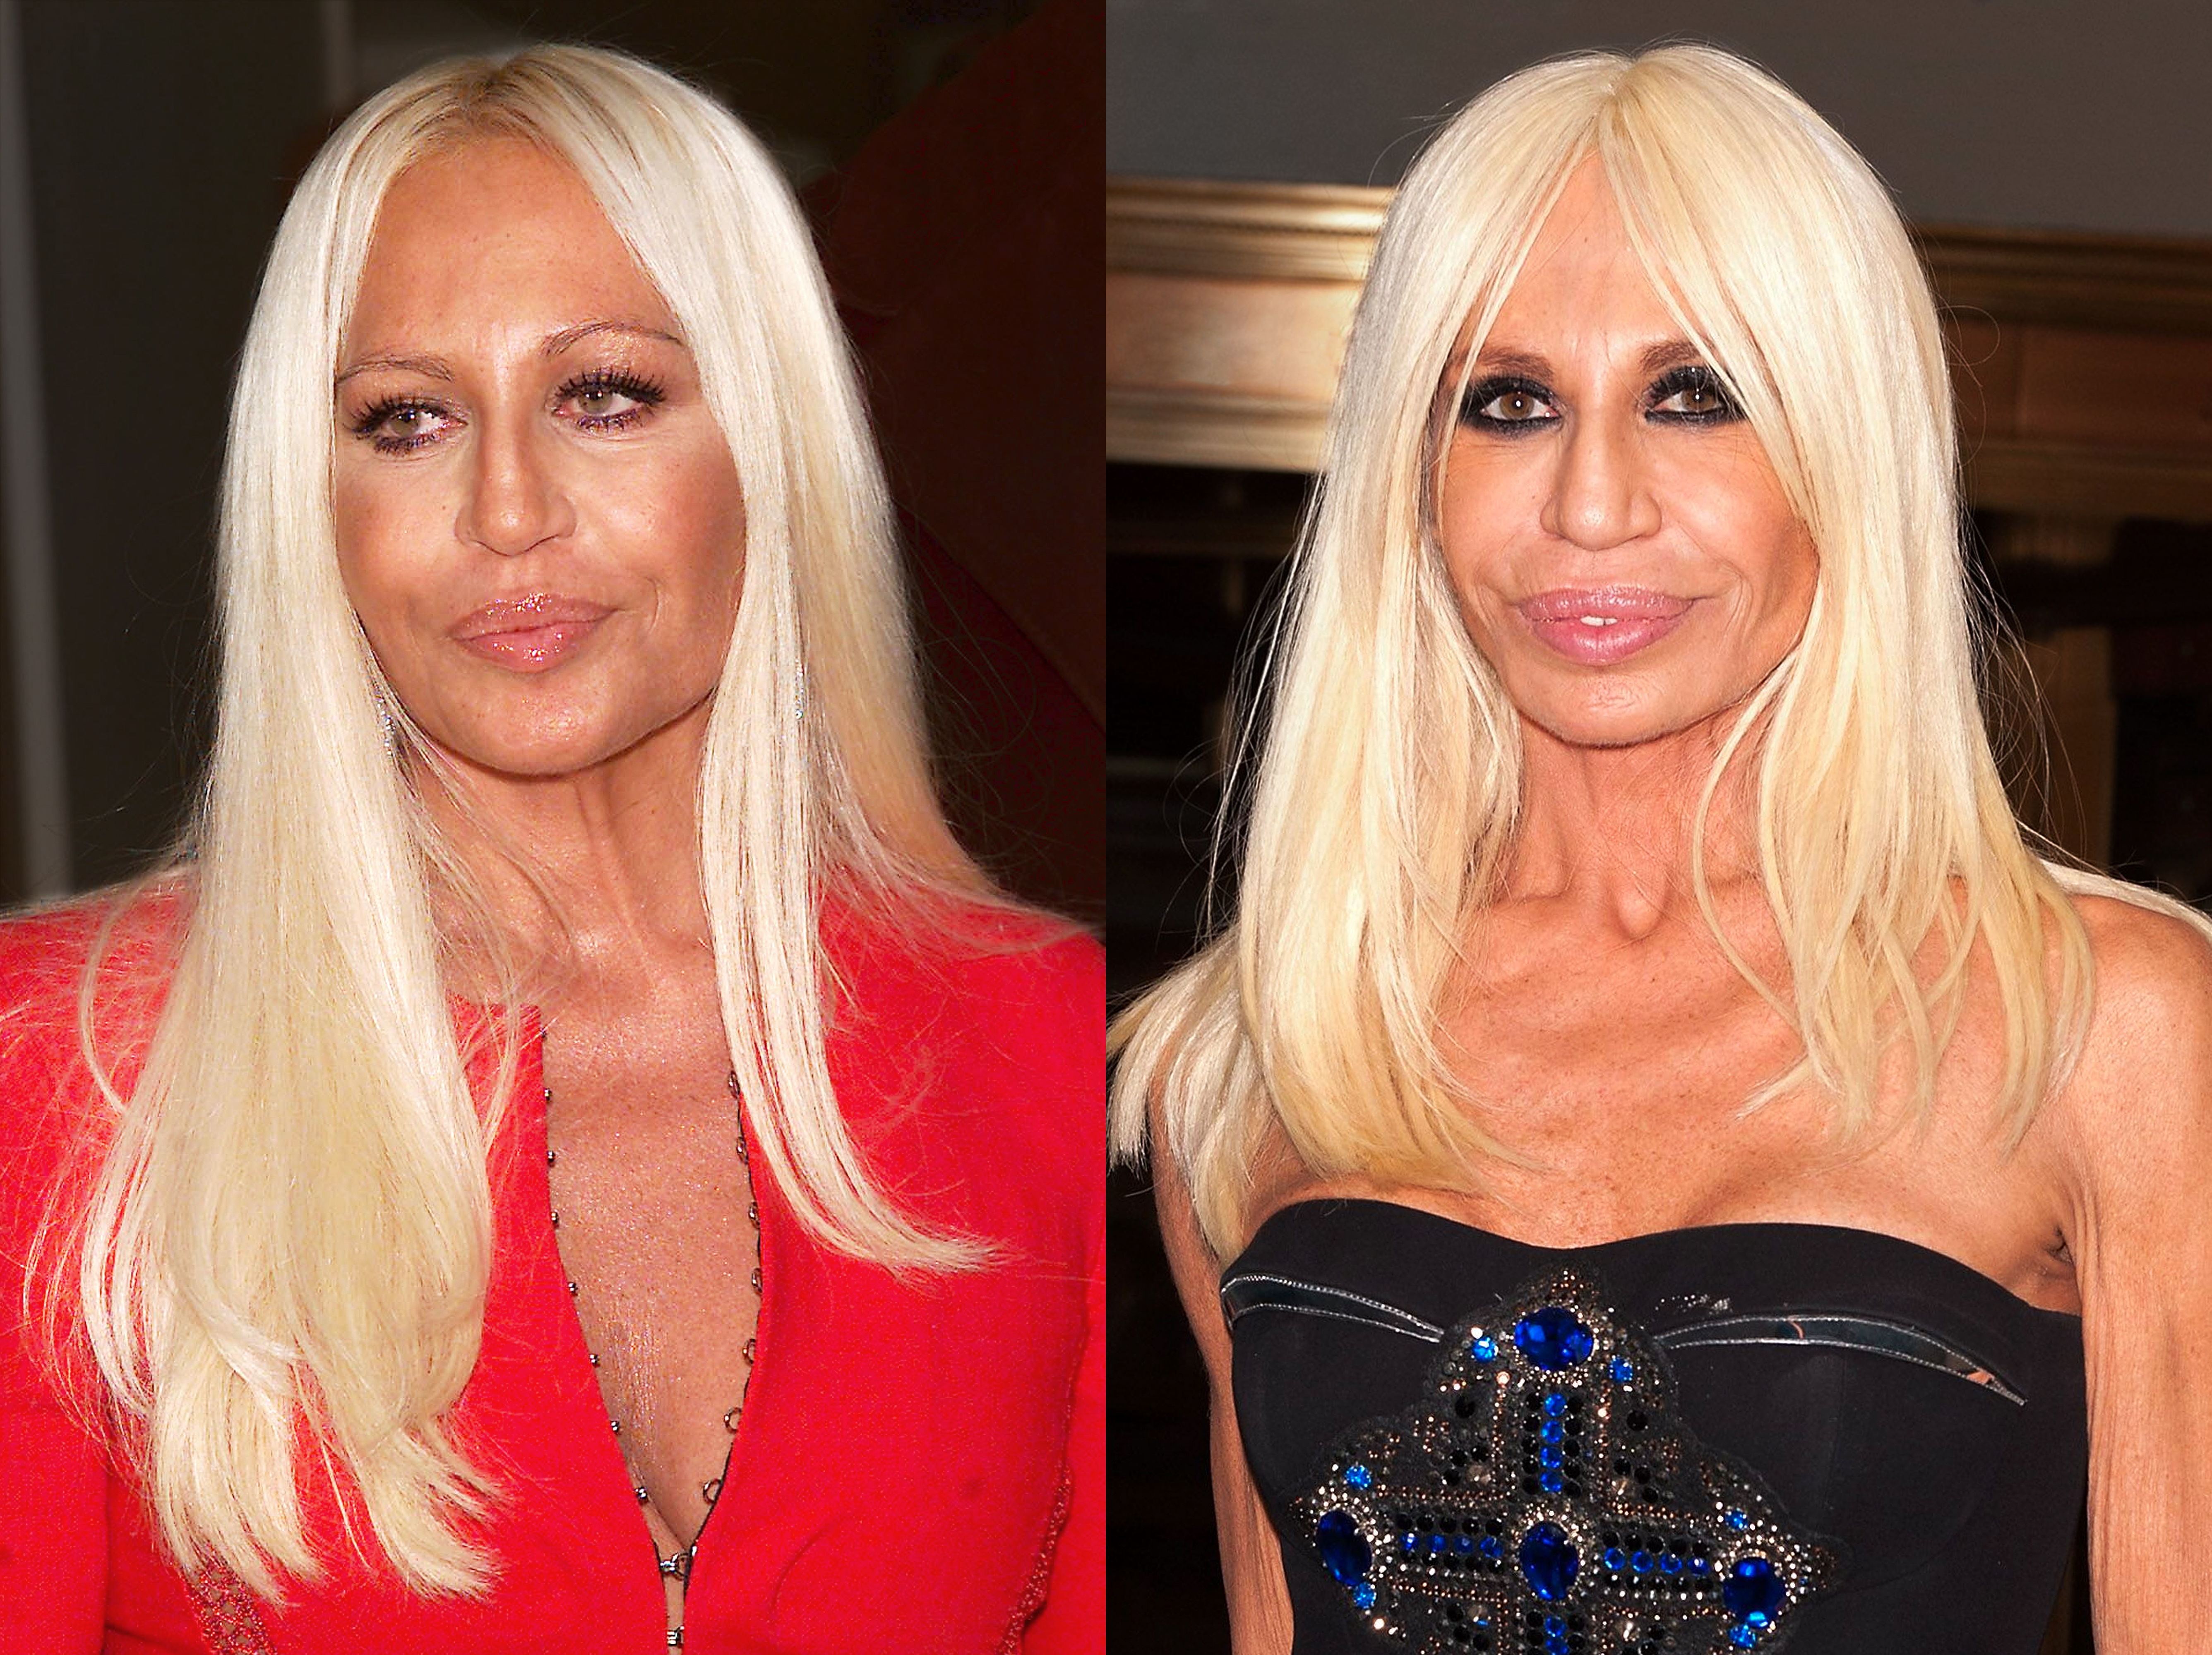 Donatella Versace in 2001 vs 2012 | Source: Getty Images